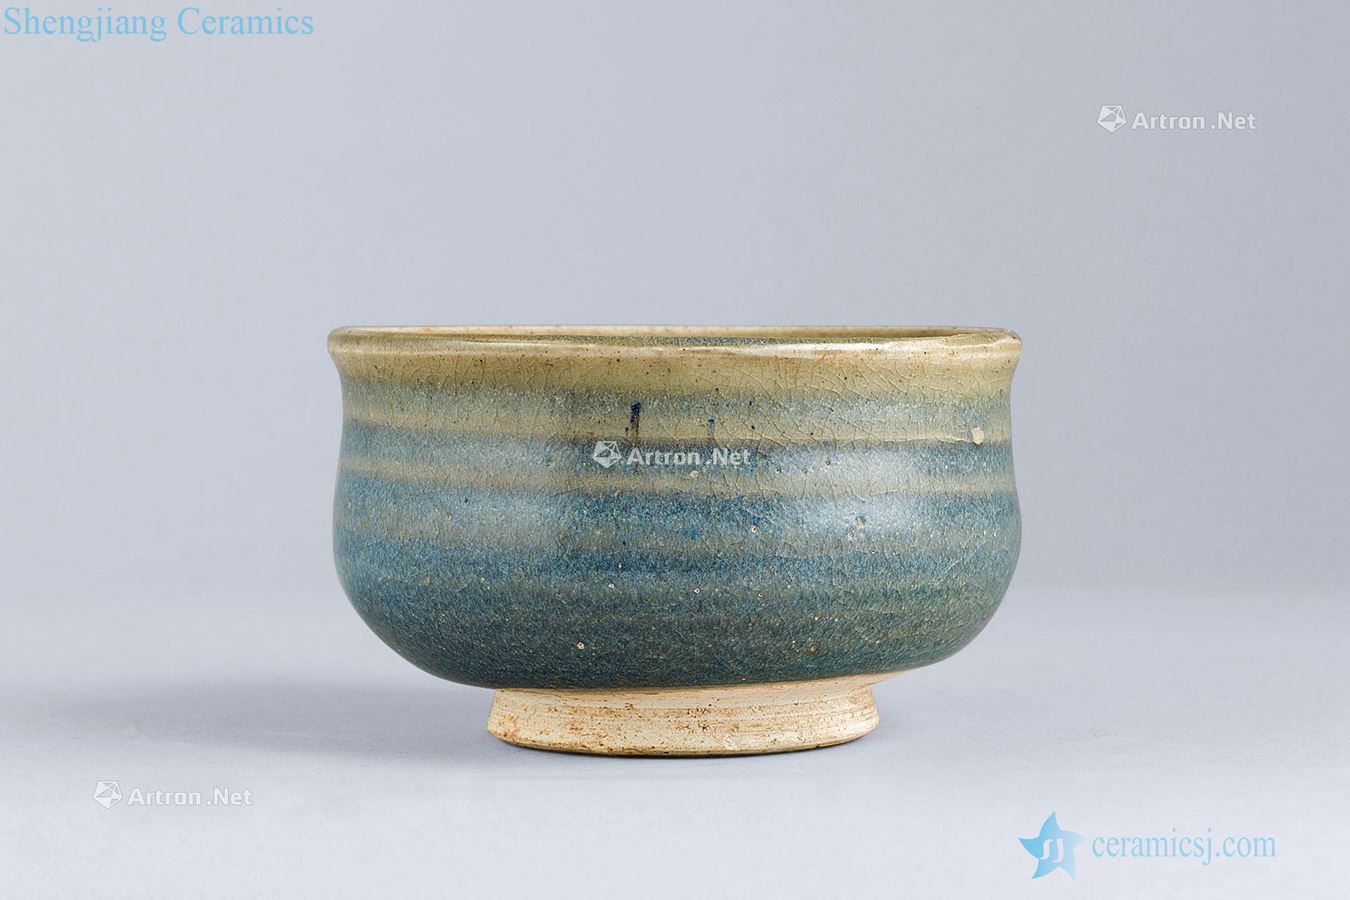 The yuan dynasty (1279-1368) string lines masterpieces bowl